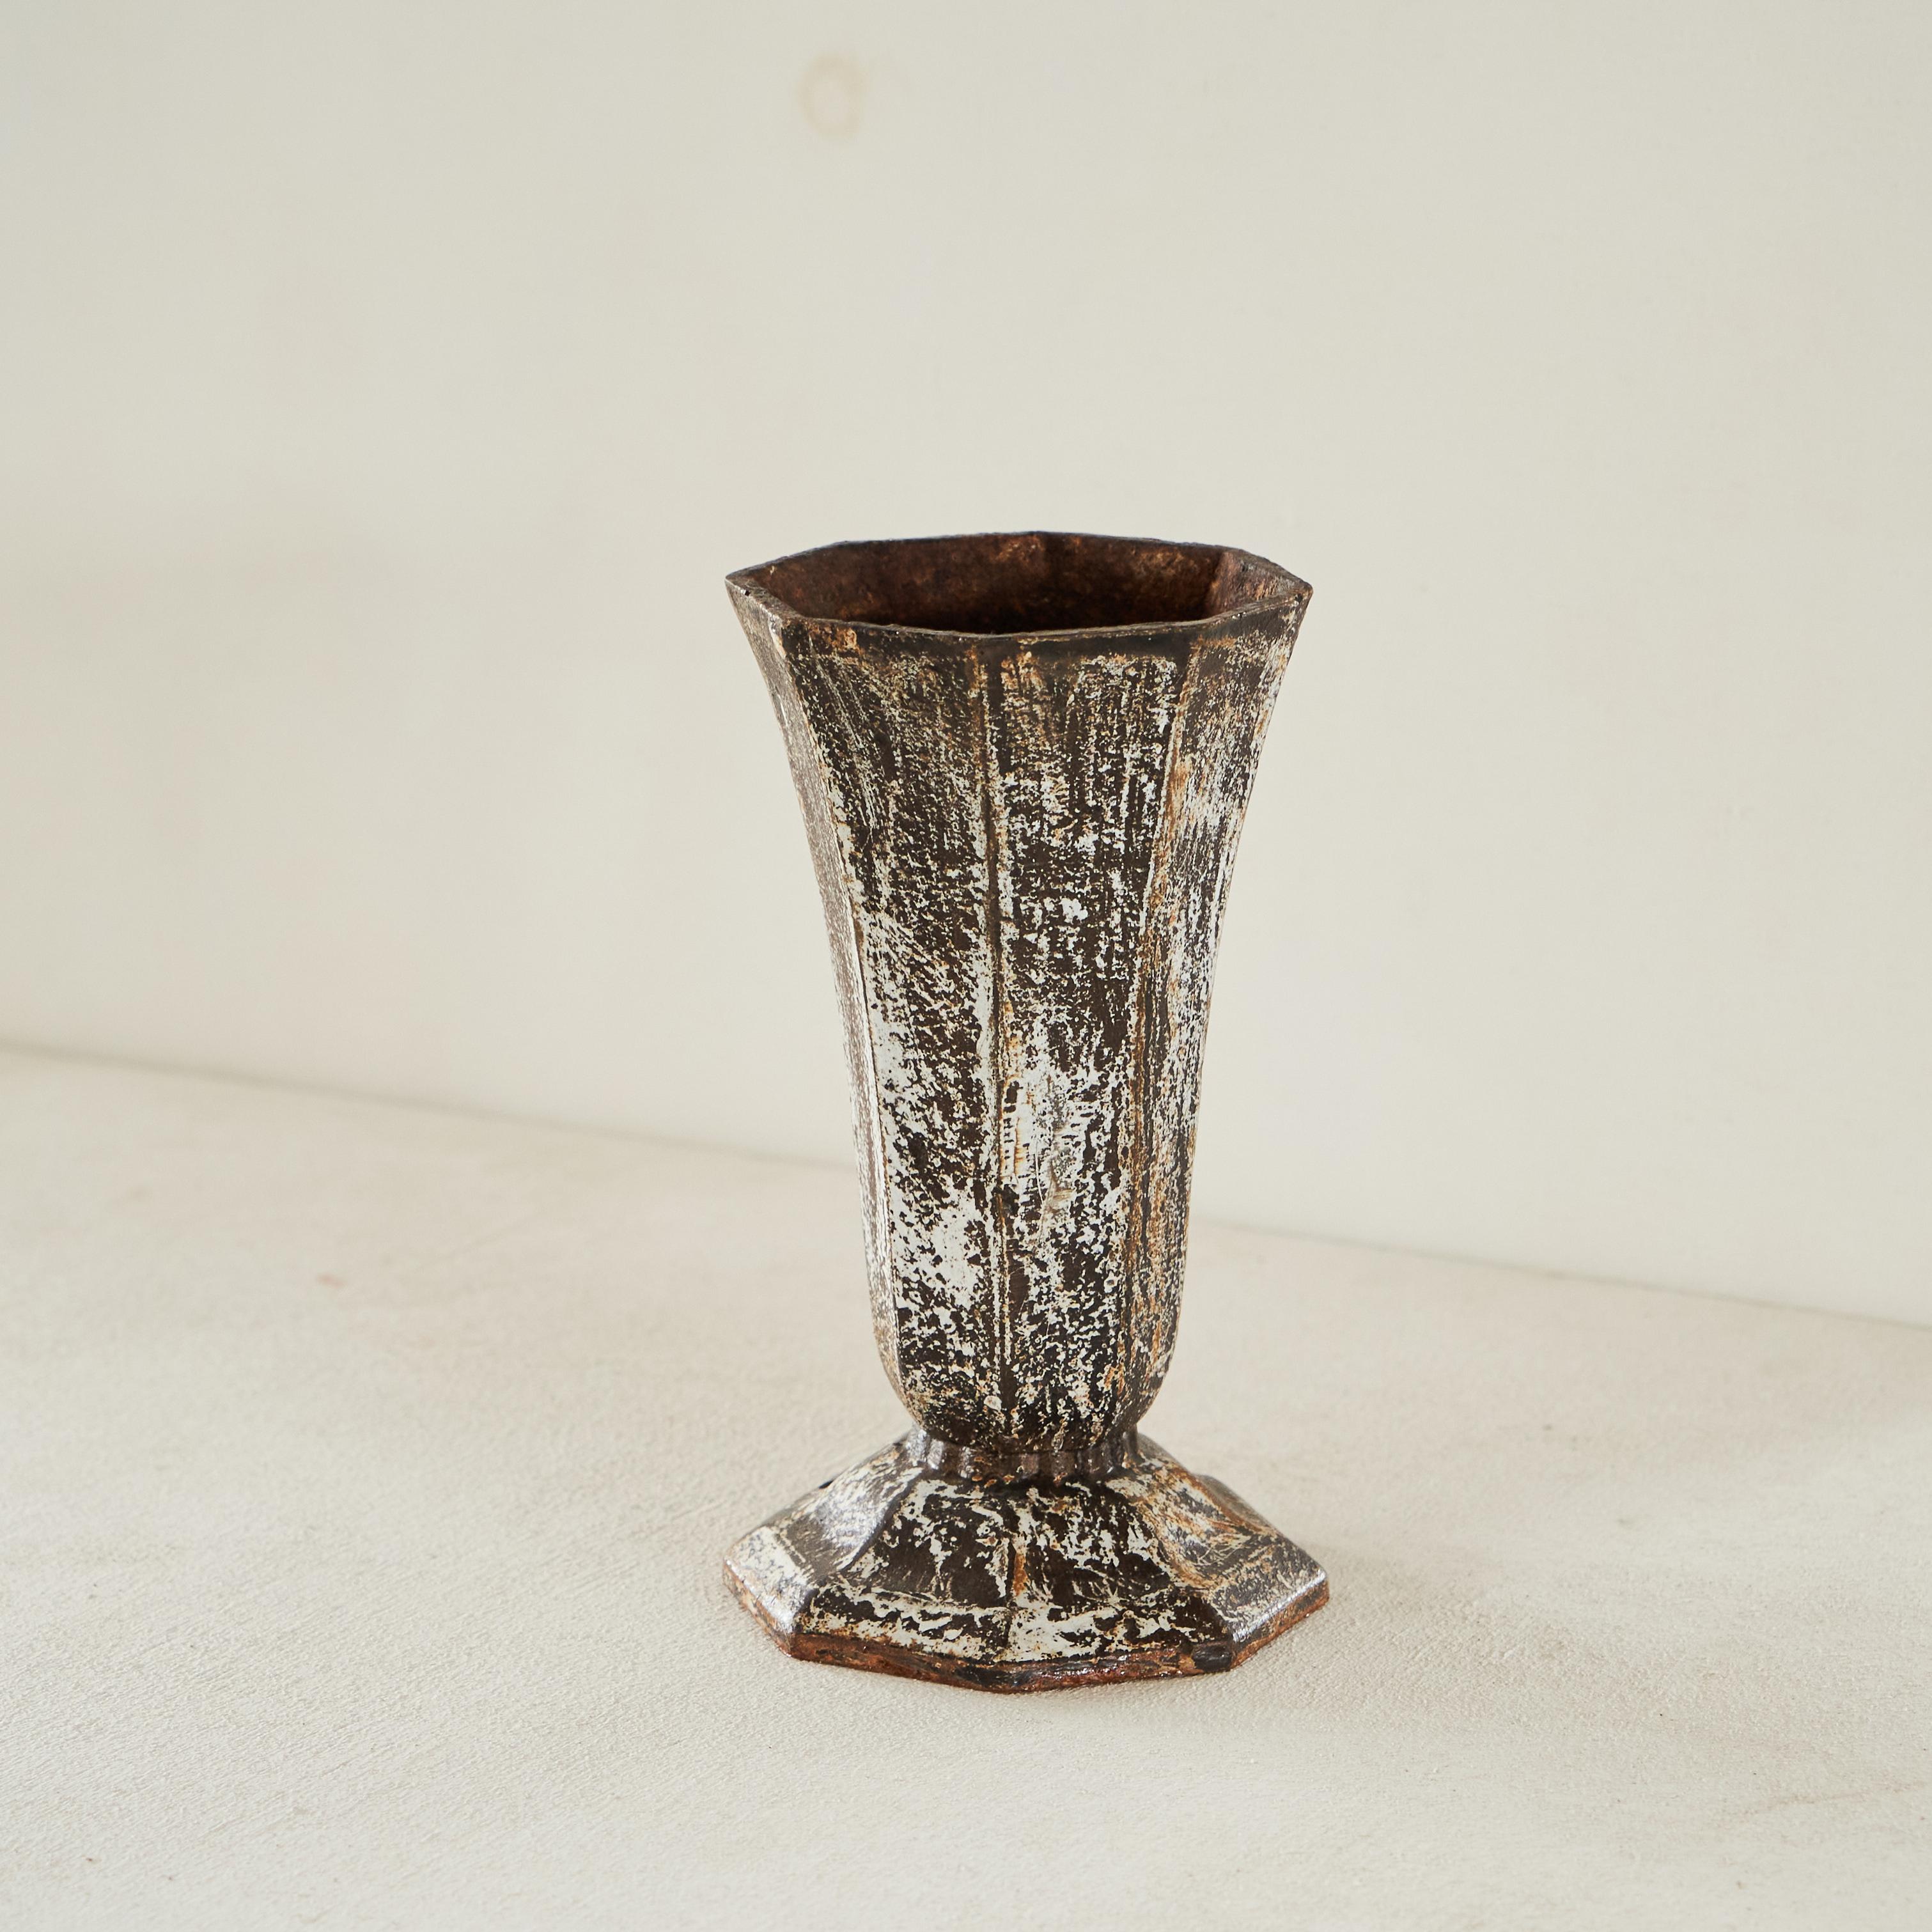 European Art Deco Vase in Patinated an Rusted Metal 1930s For Sale